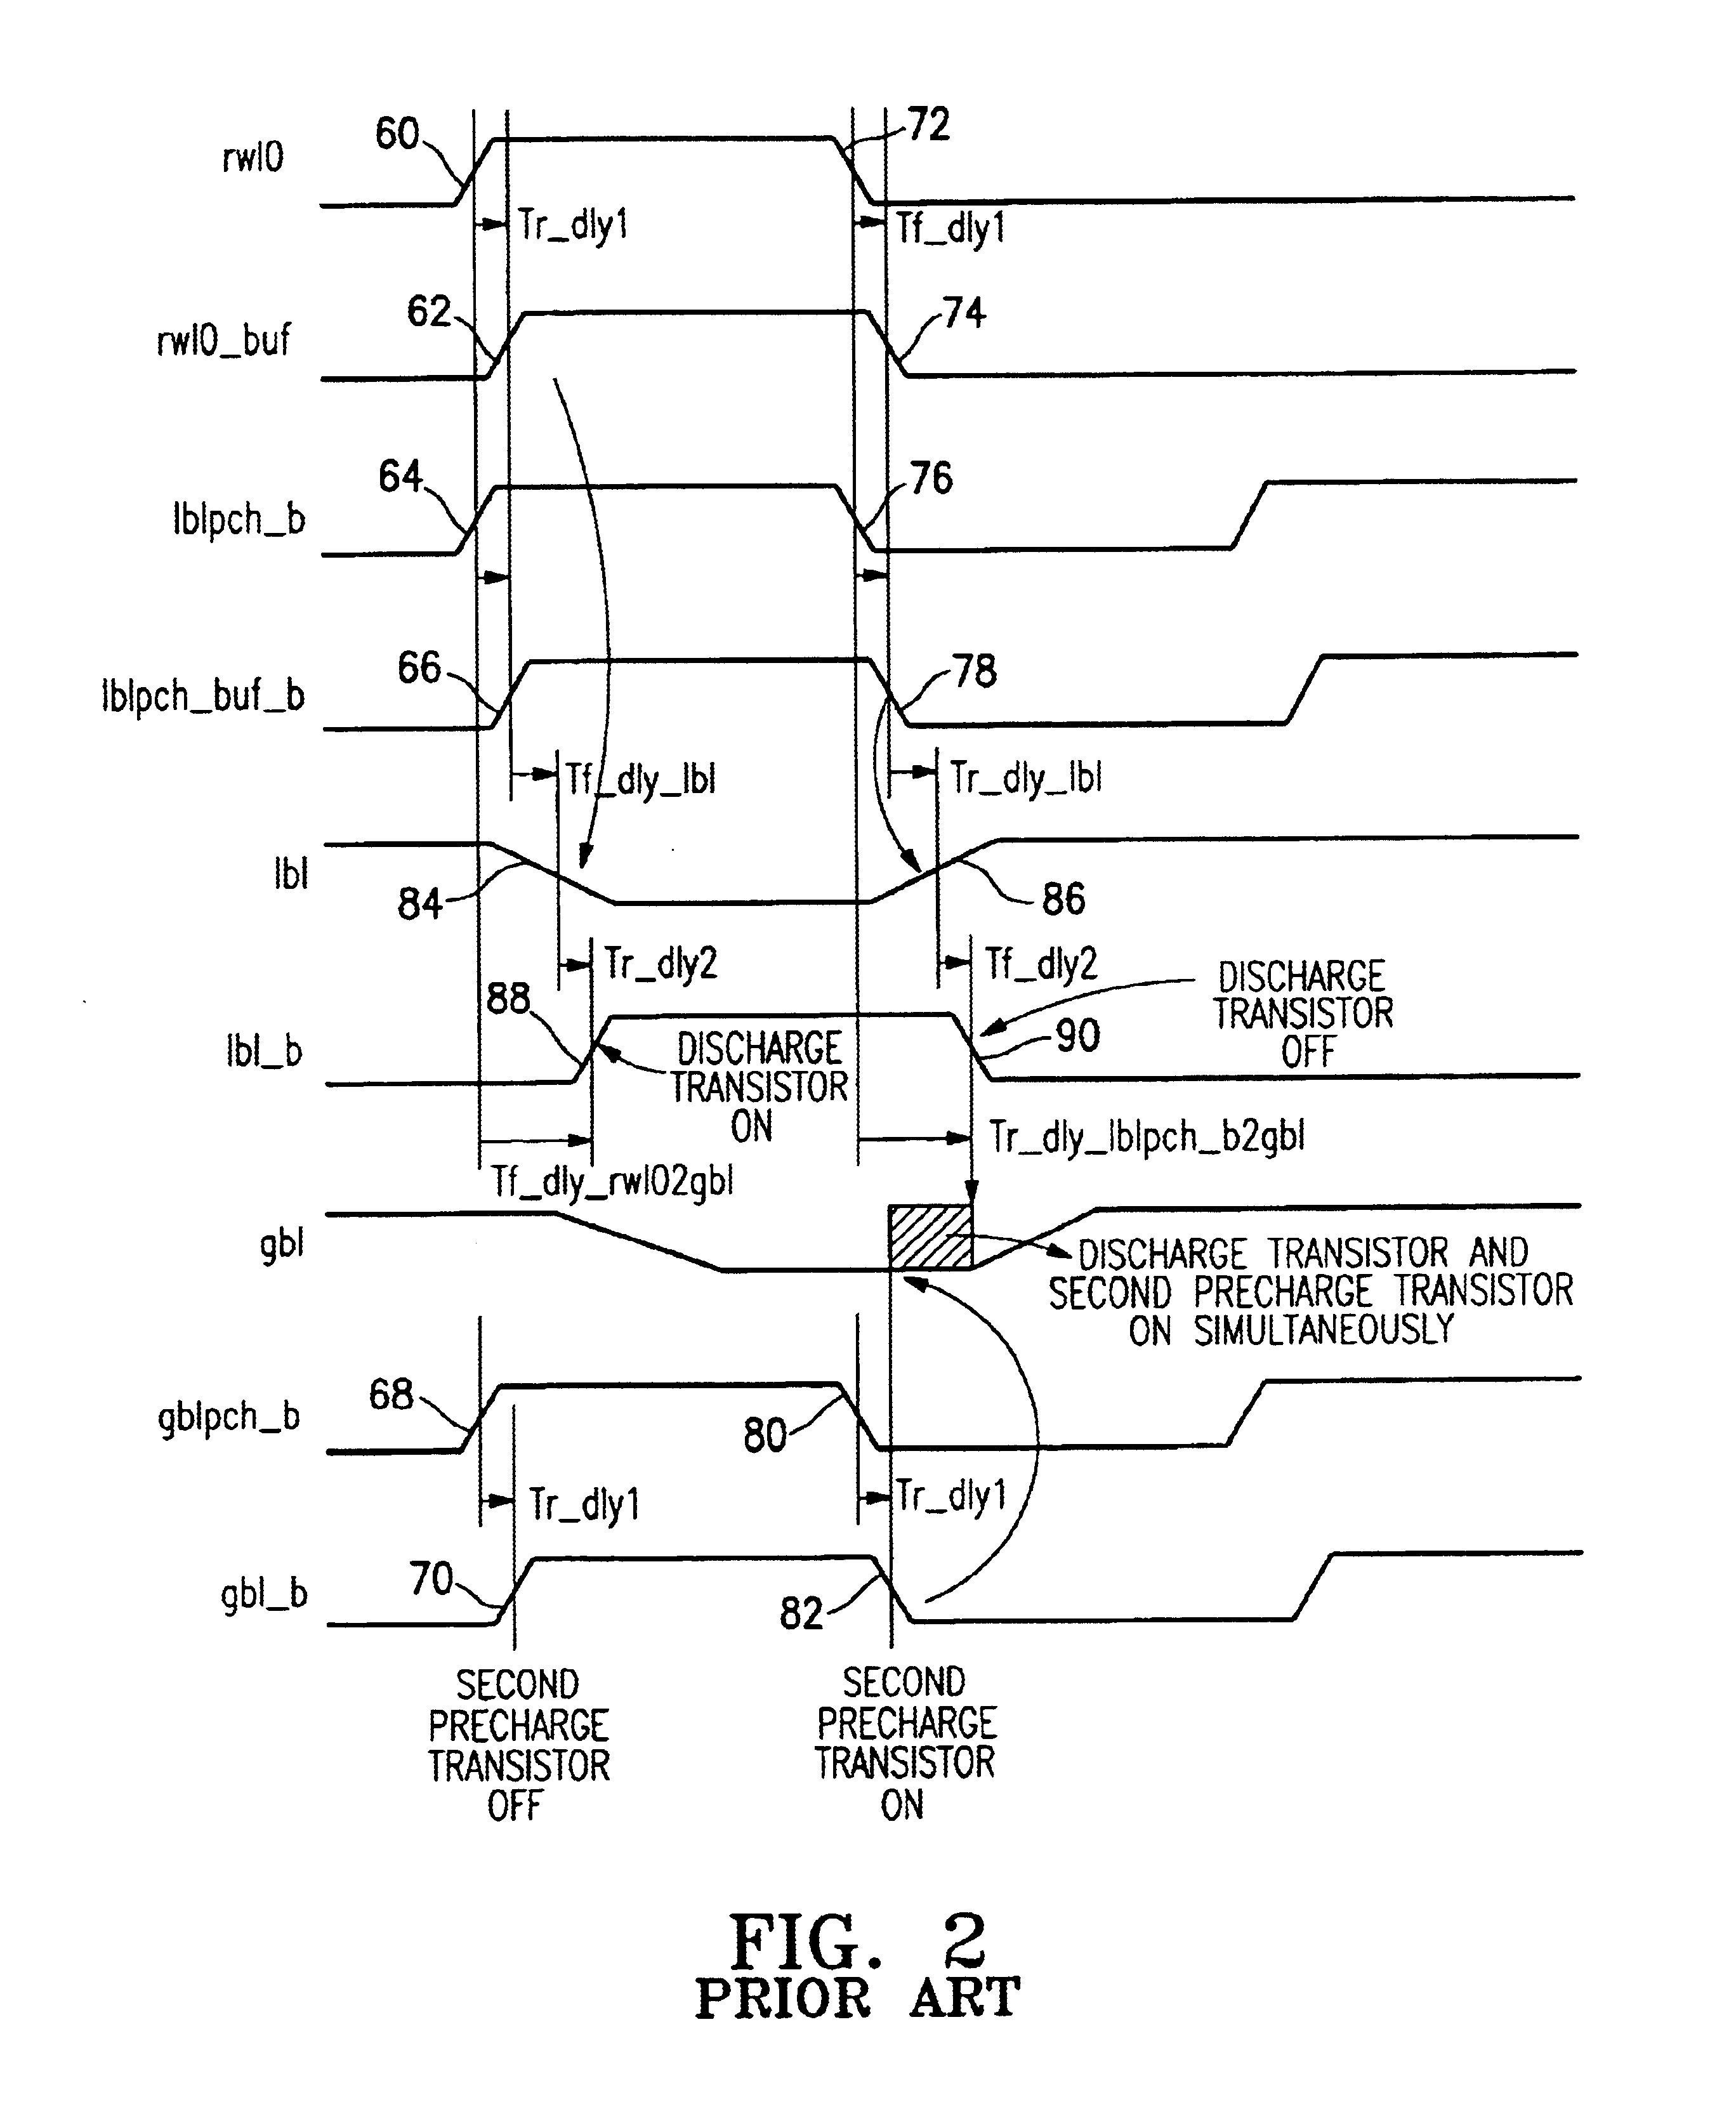 Apparatus and method for precharging and discharging a domino circuit